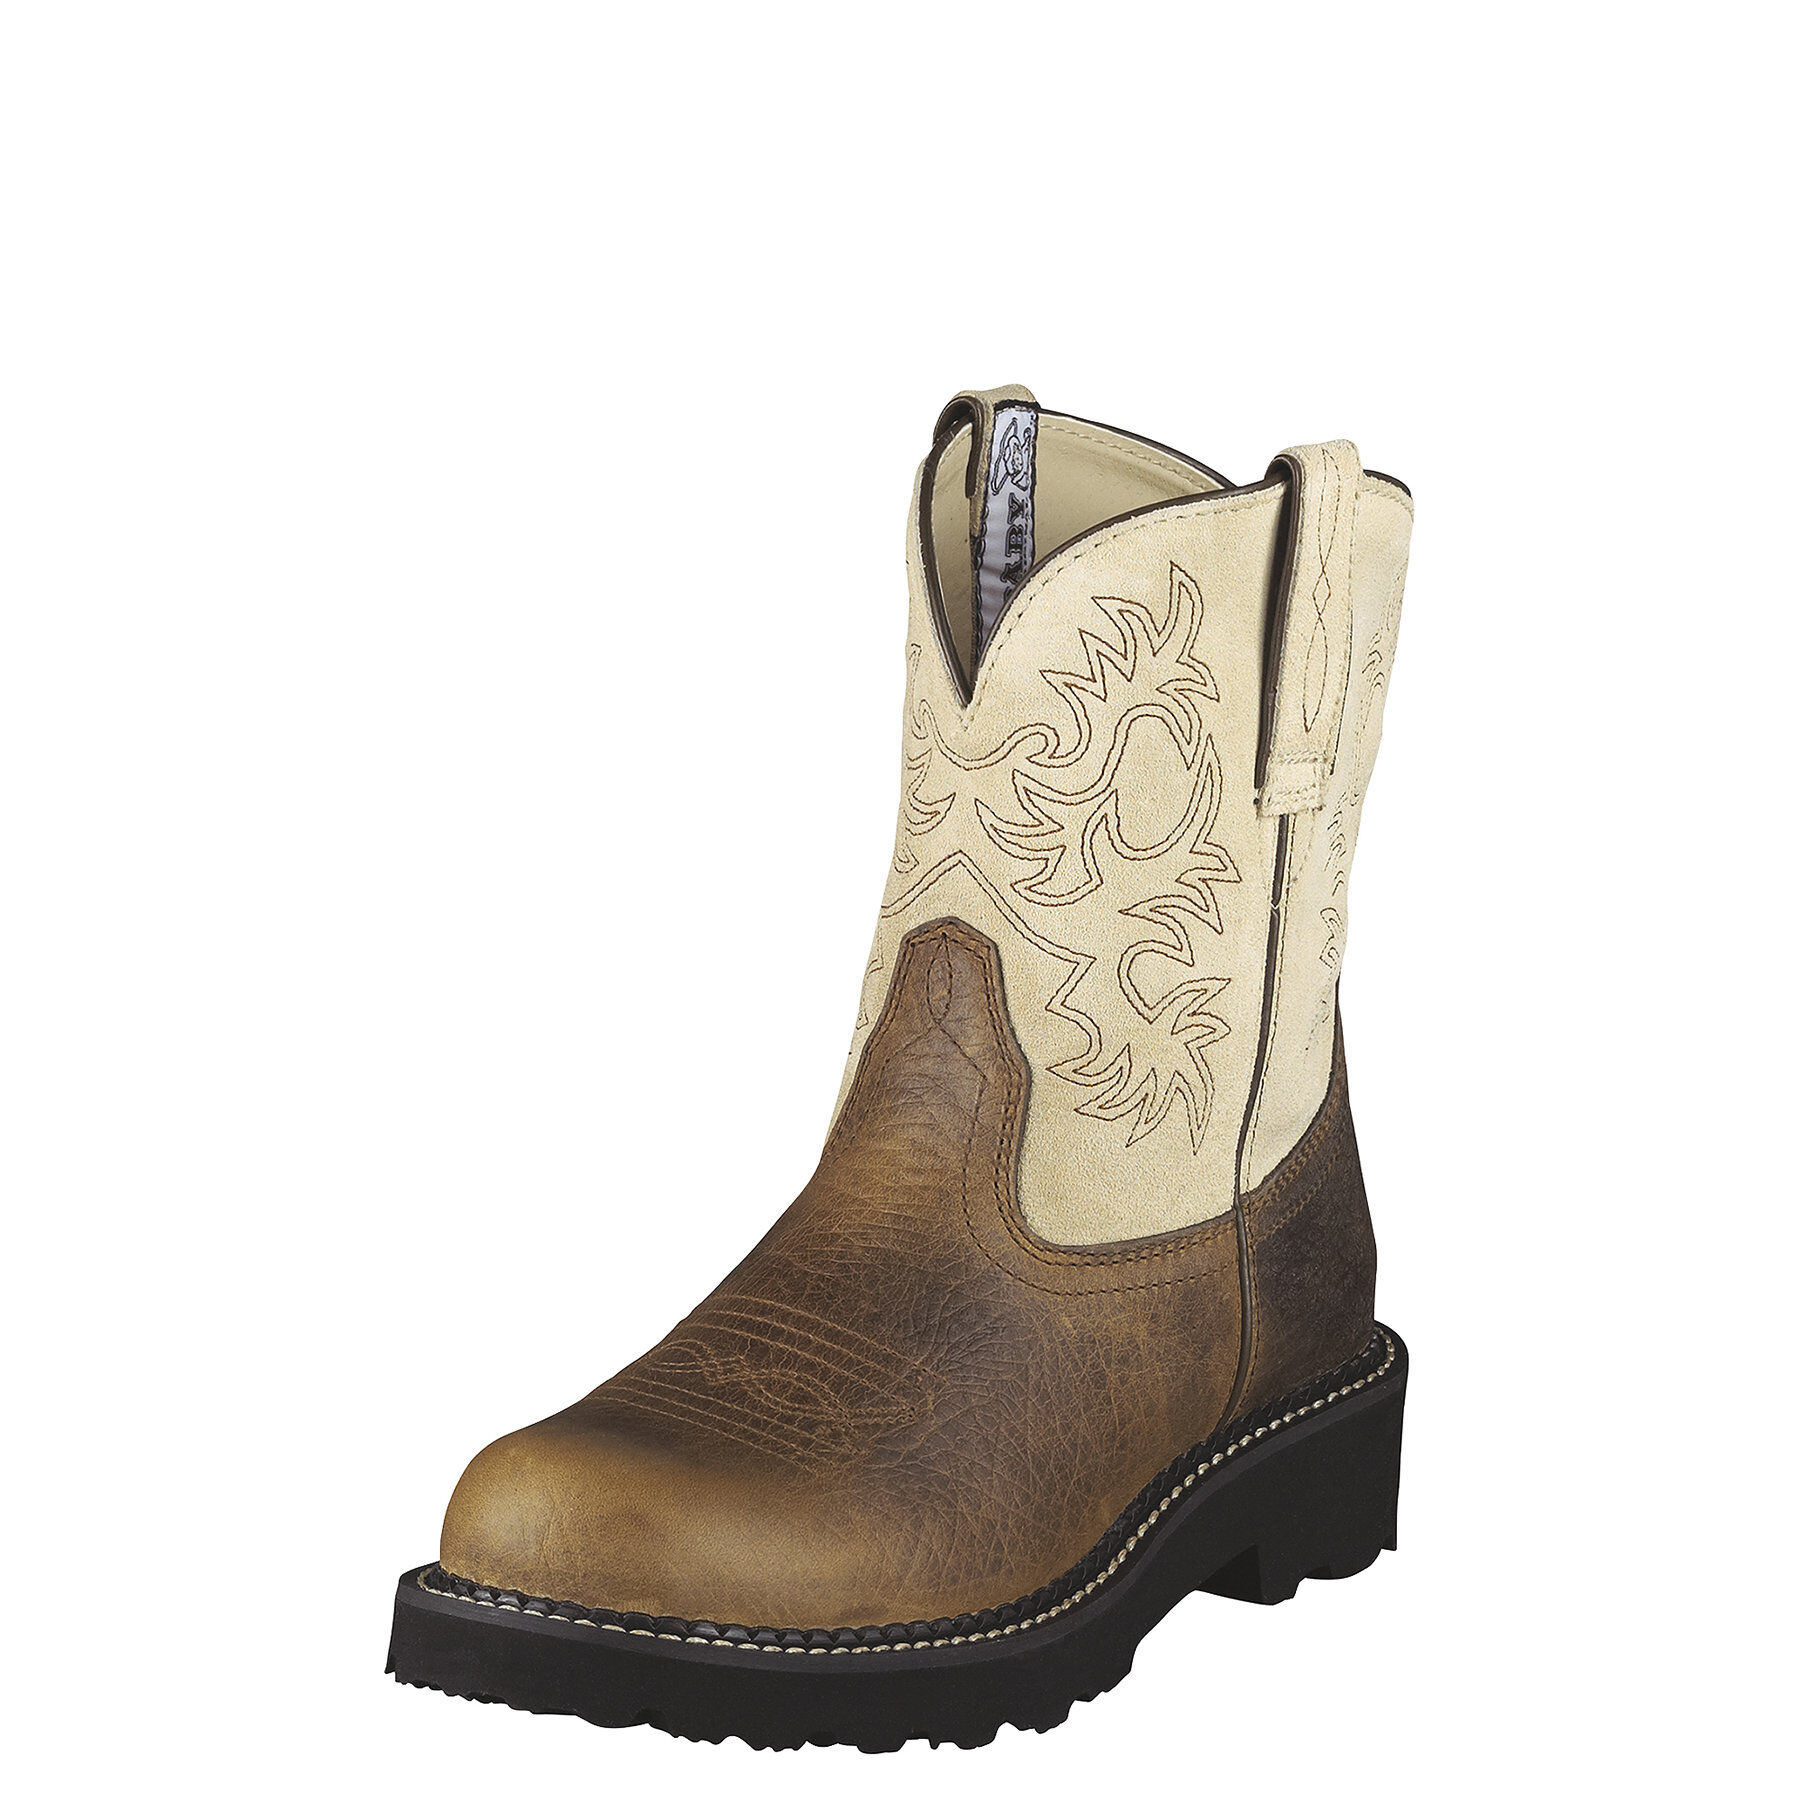 ariat boots for babies